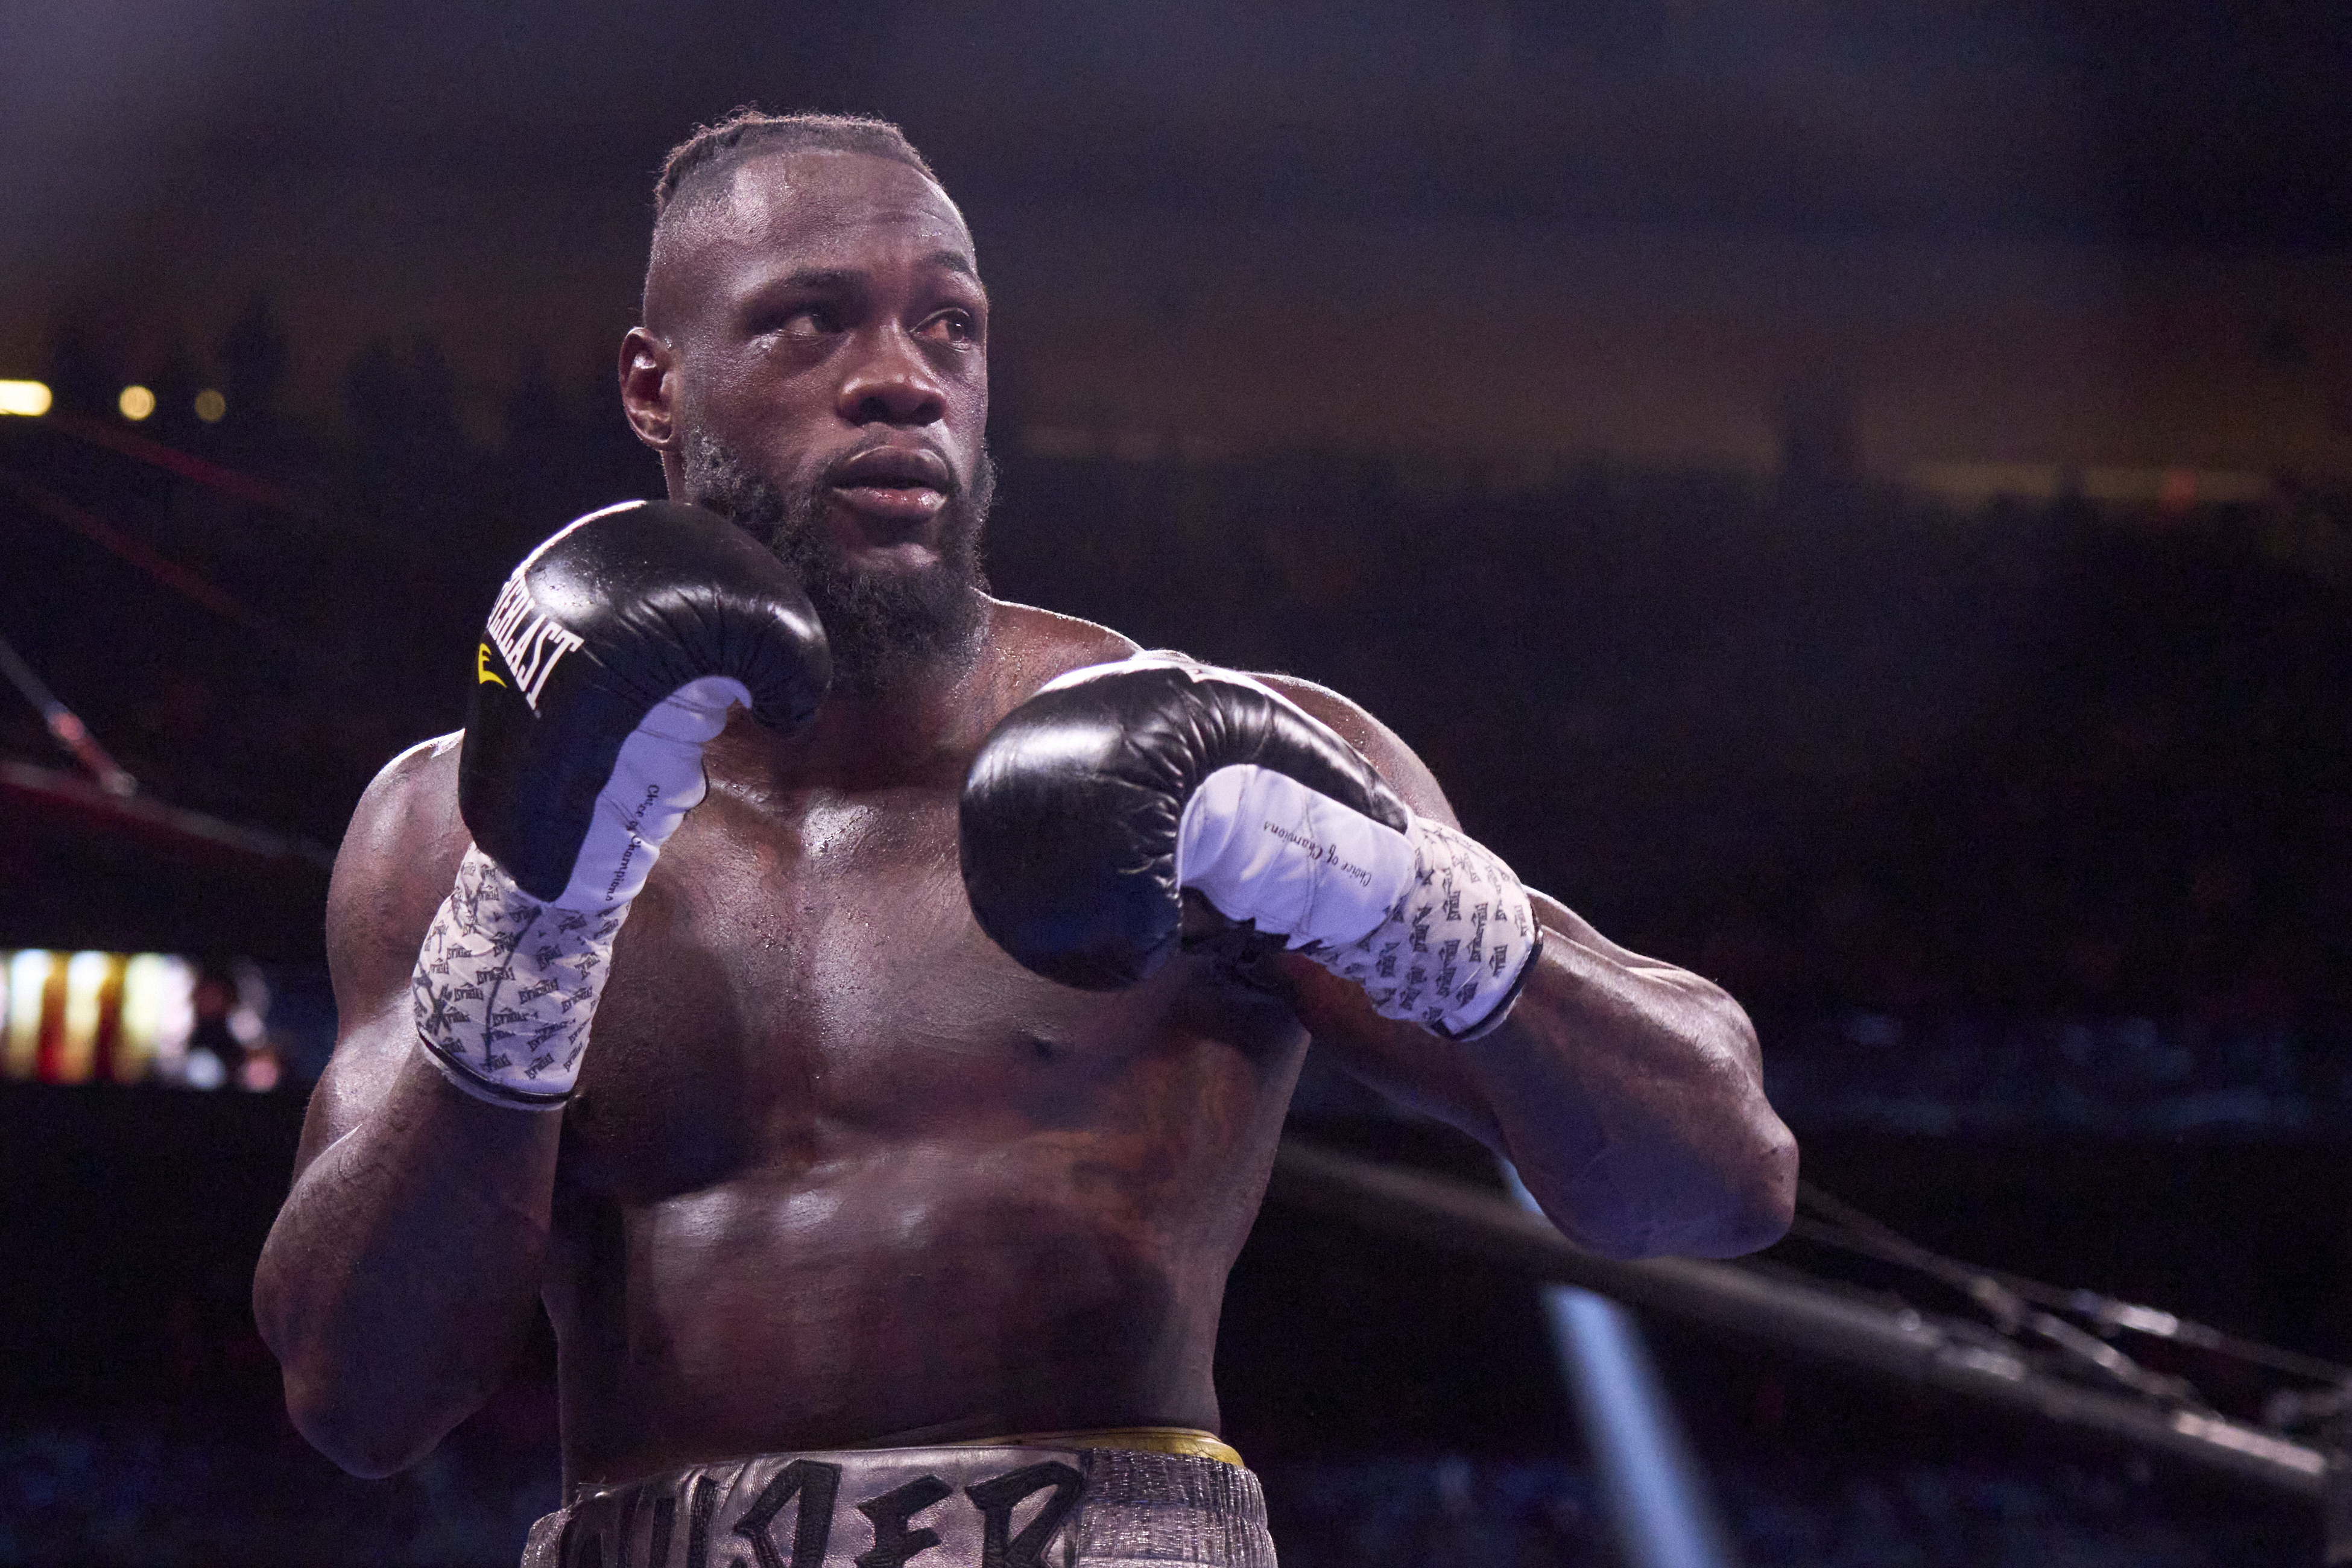 Will Deontay Wilder be the same old Deontay Wilder against Robert Helenius?